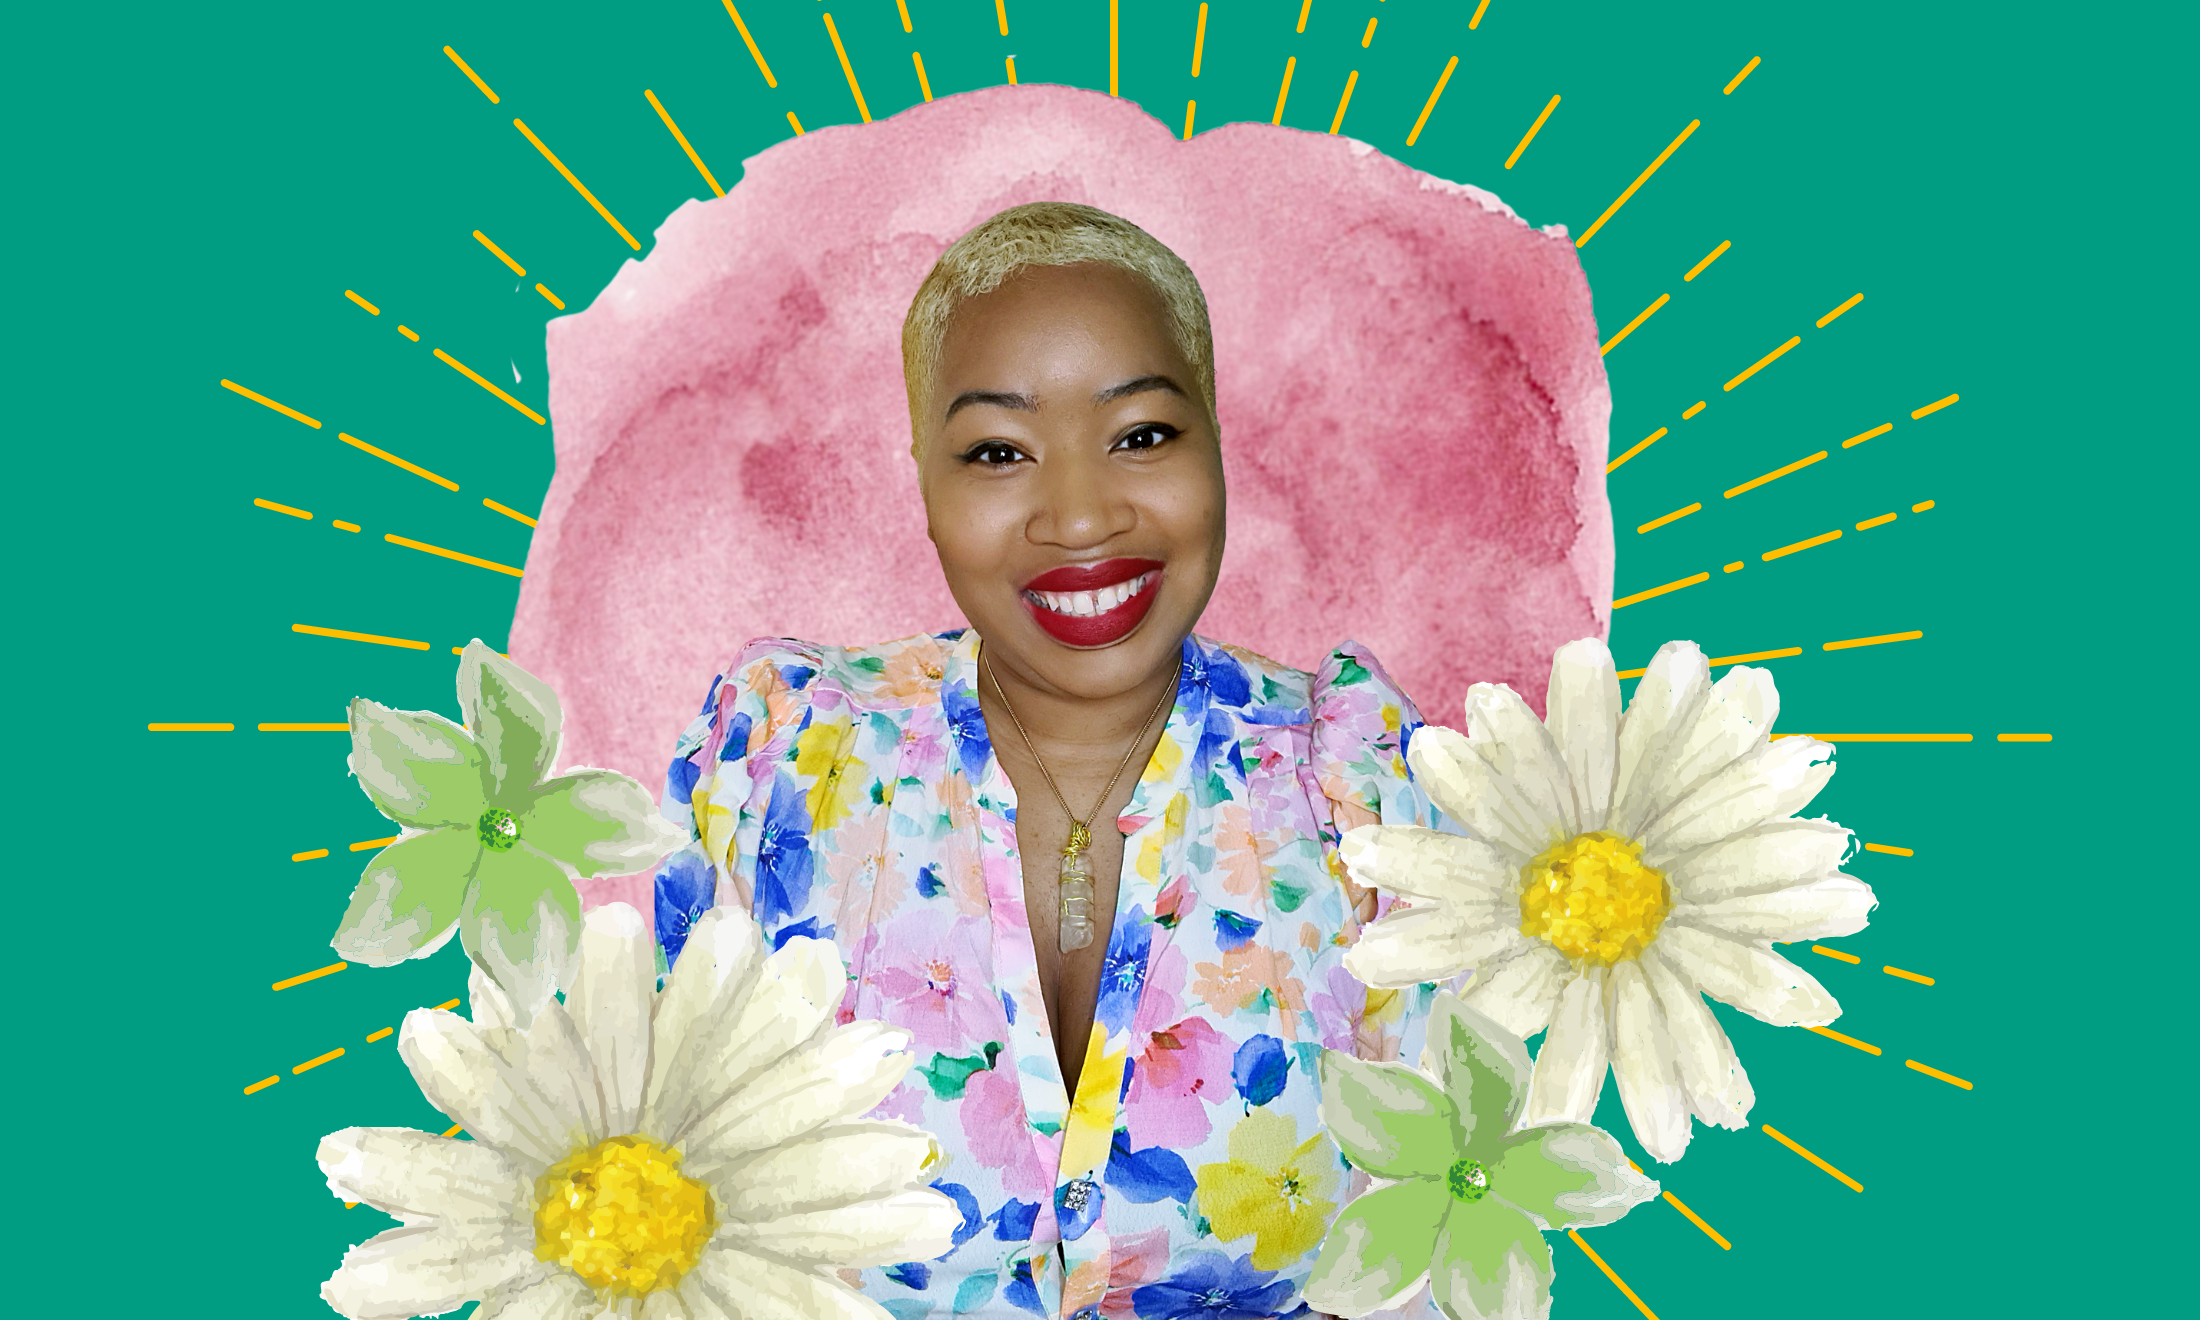 Leona Nichole Black’s debut book ‘Tarot Therapy’ wants to bring us closer to ourselves